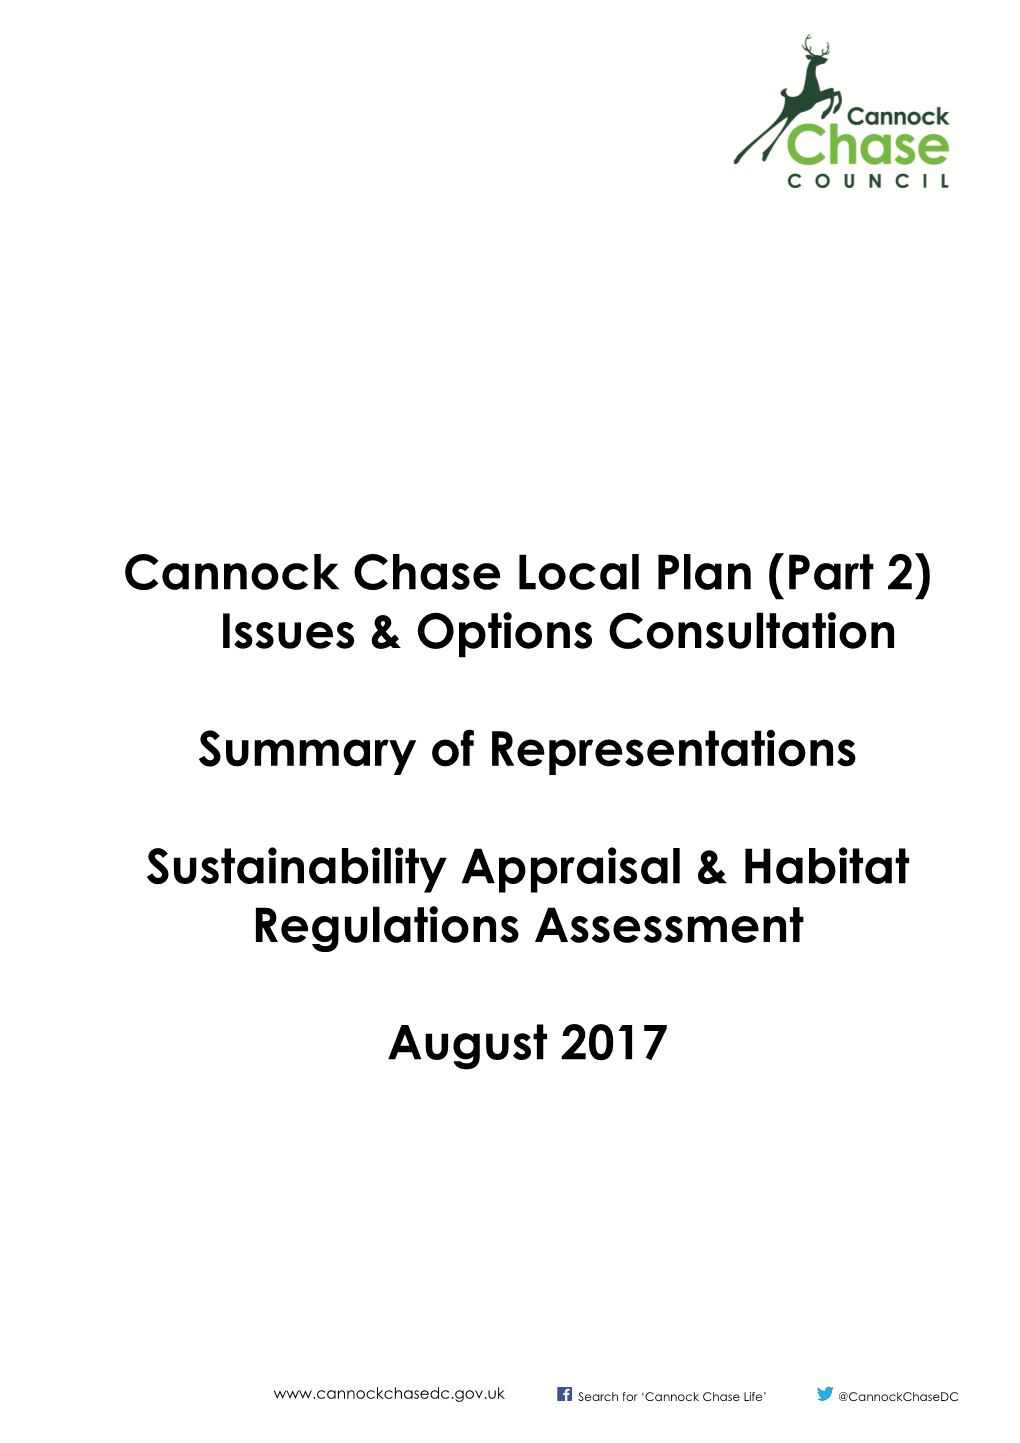 Cannock Chase Local Plan (Part 2) Issues & Options Consultation